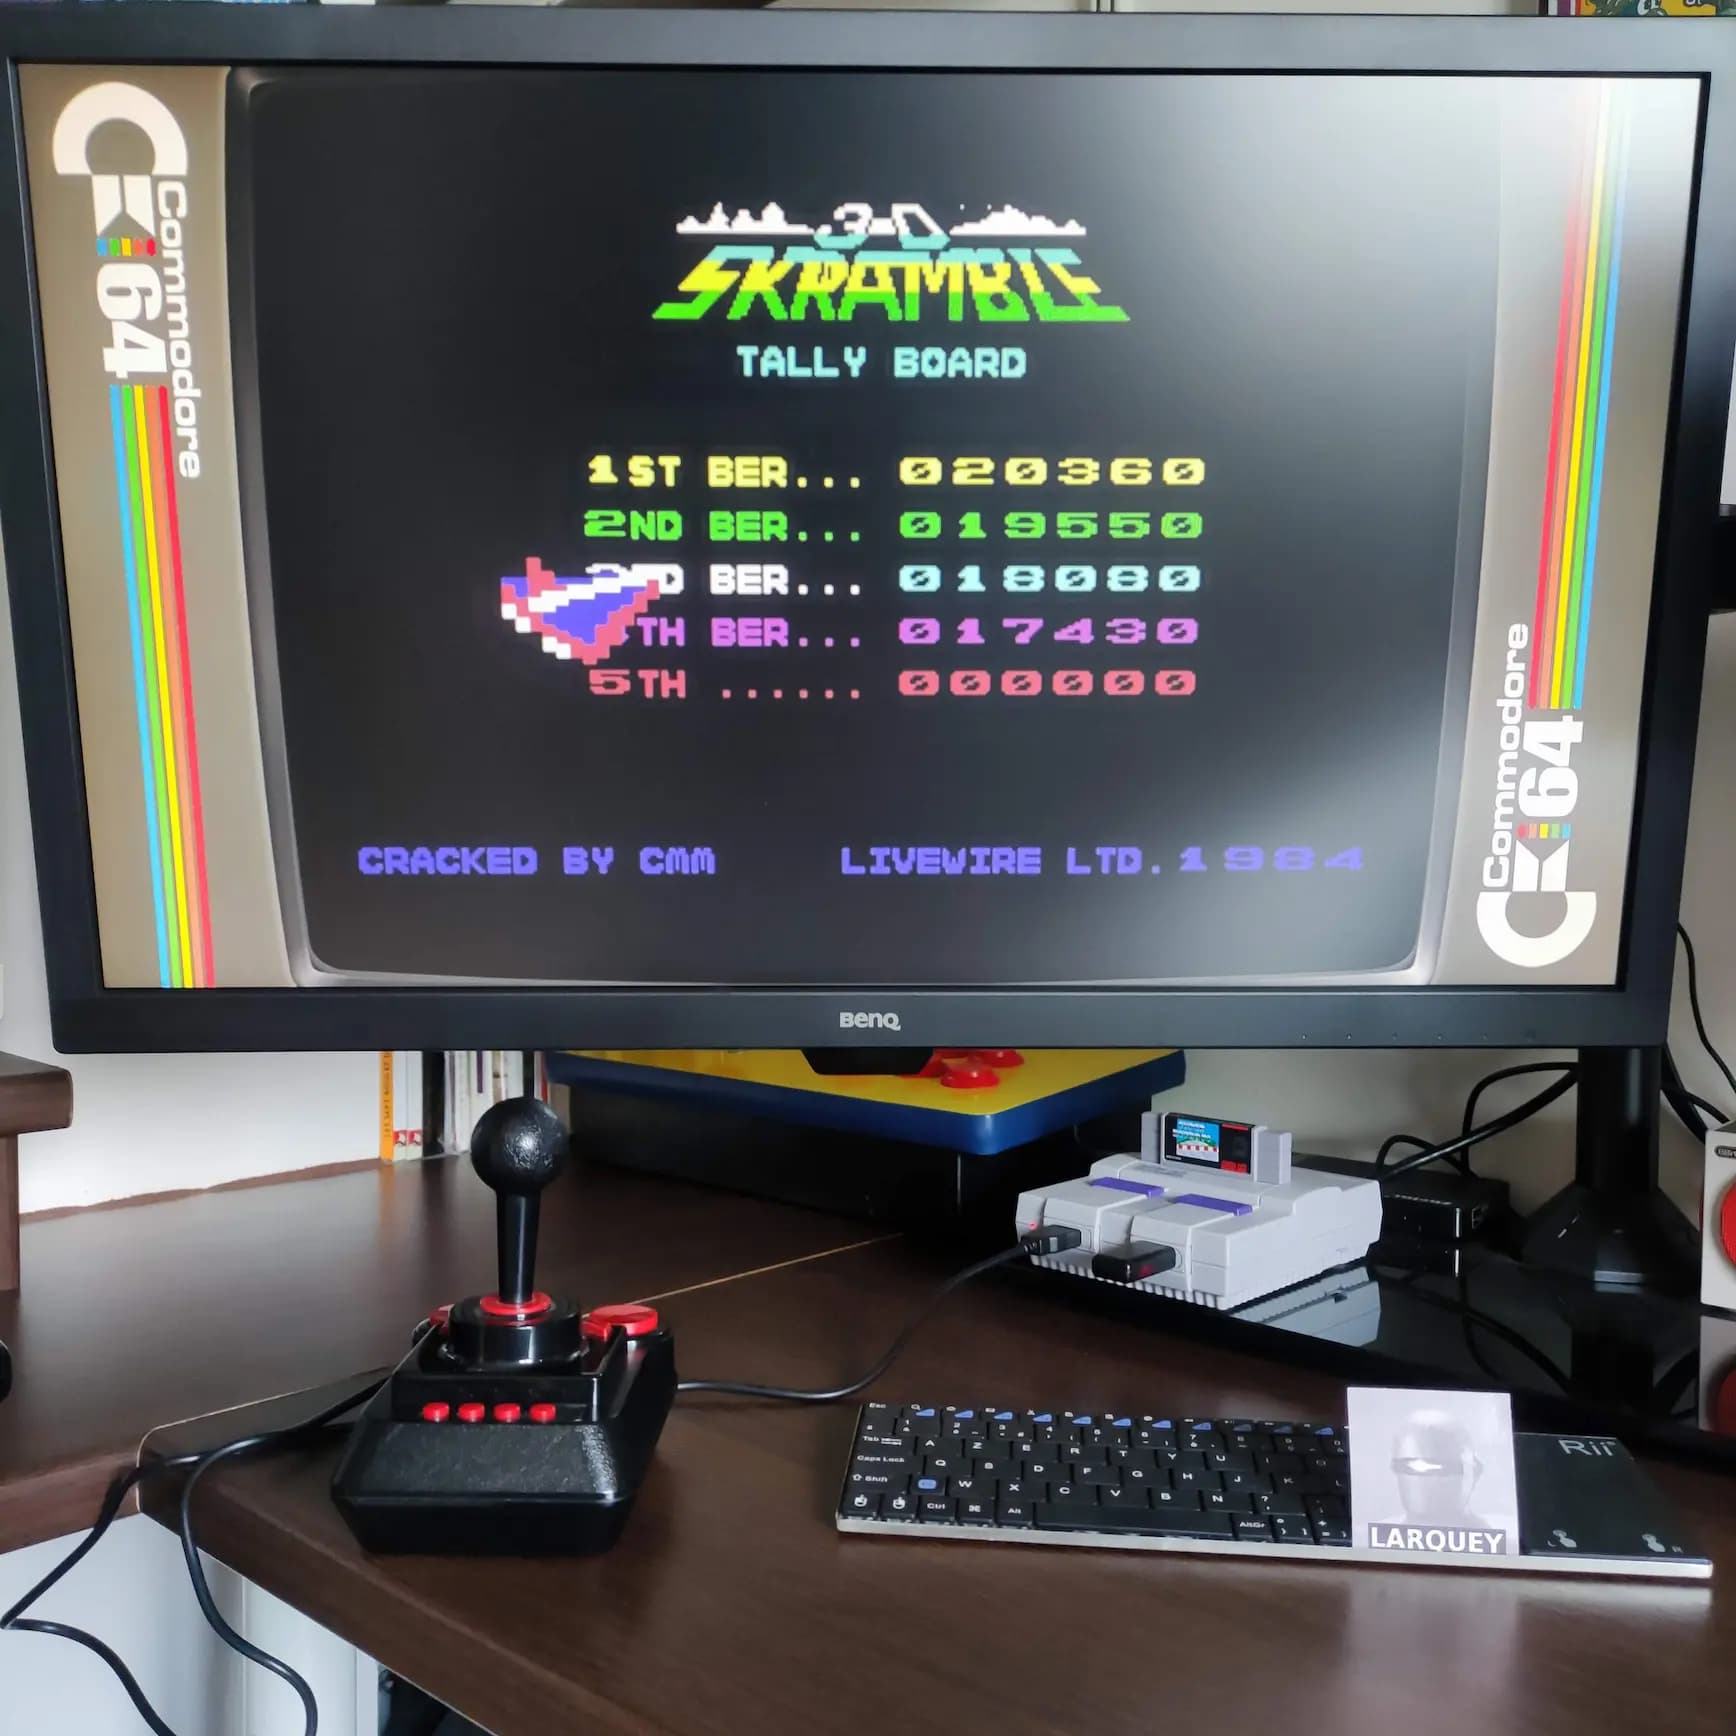 Larquey: 3-D Skramble (Commodore 64 Emulated) 20,360 points on 2022-07-30 01:11:33